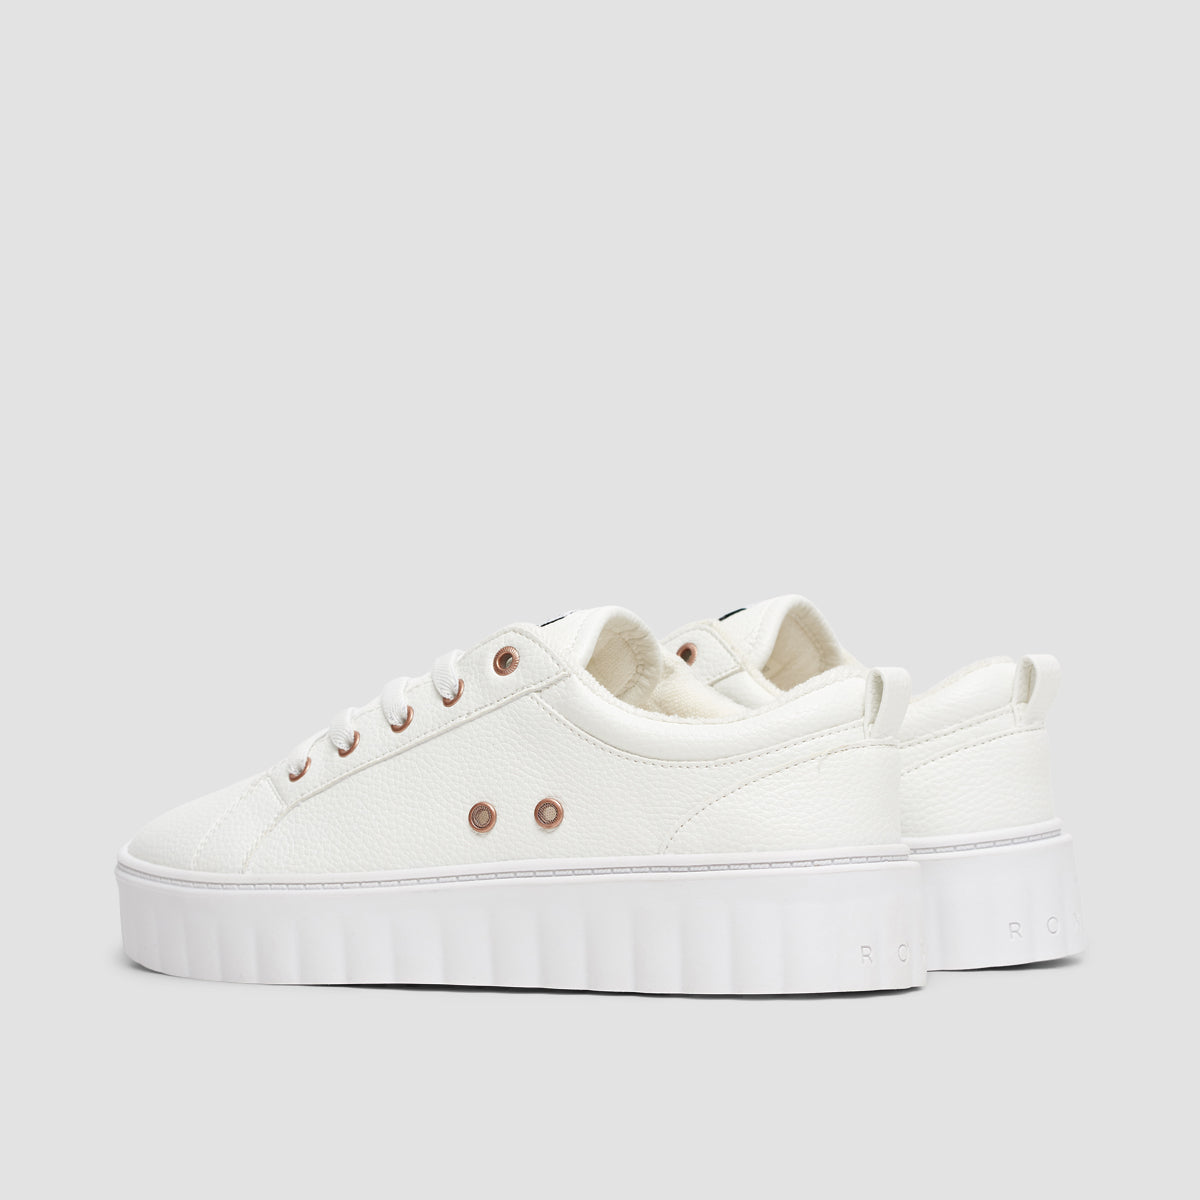 Roxy Sheilahh Shoes - White - Womens